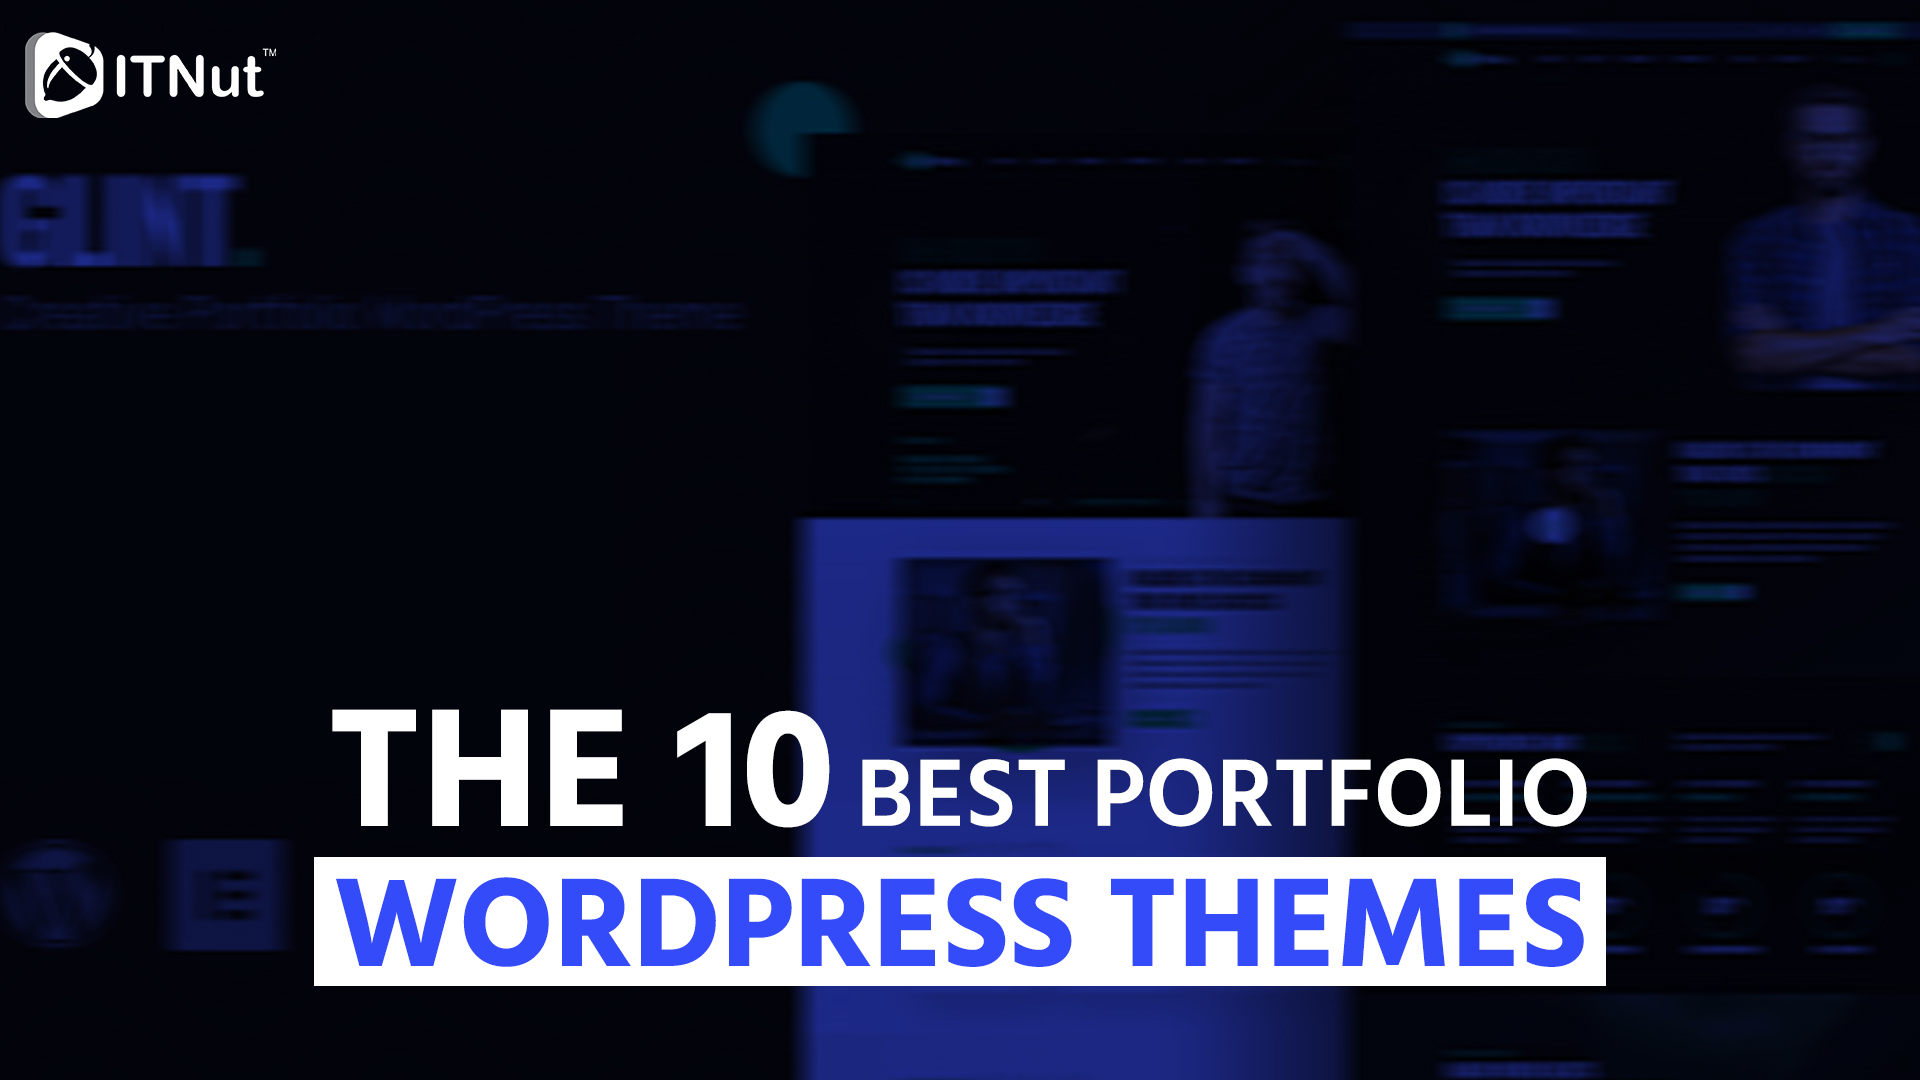 You are currently viewing The 10 Best Portfolio WordPress Themes